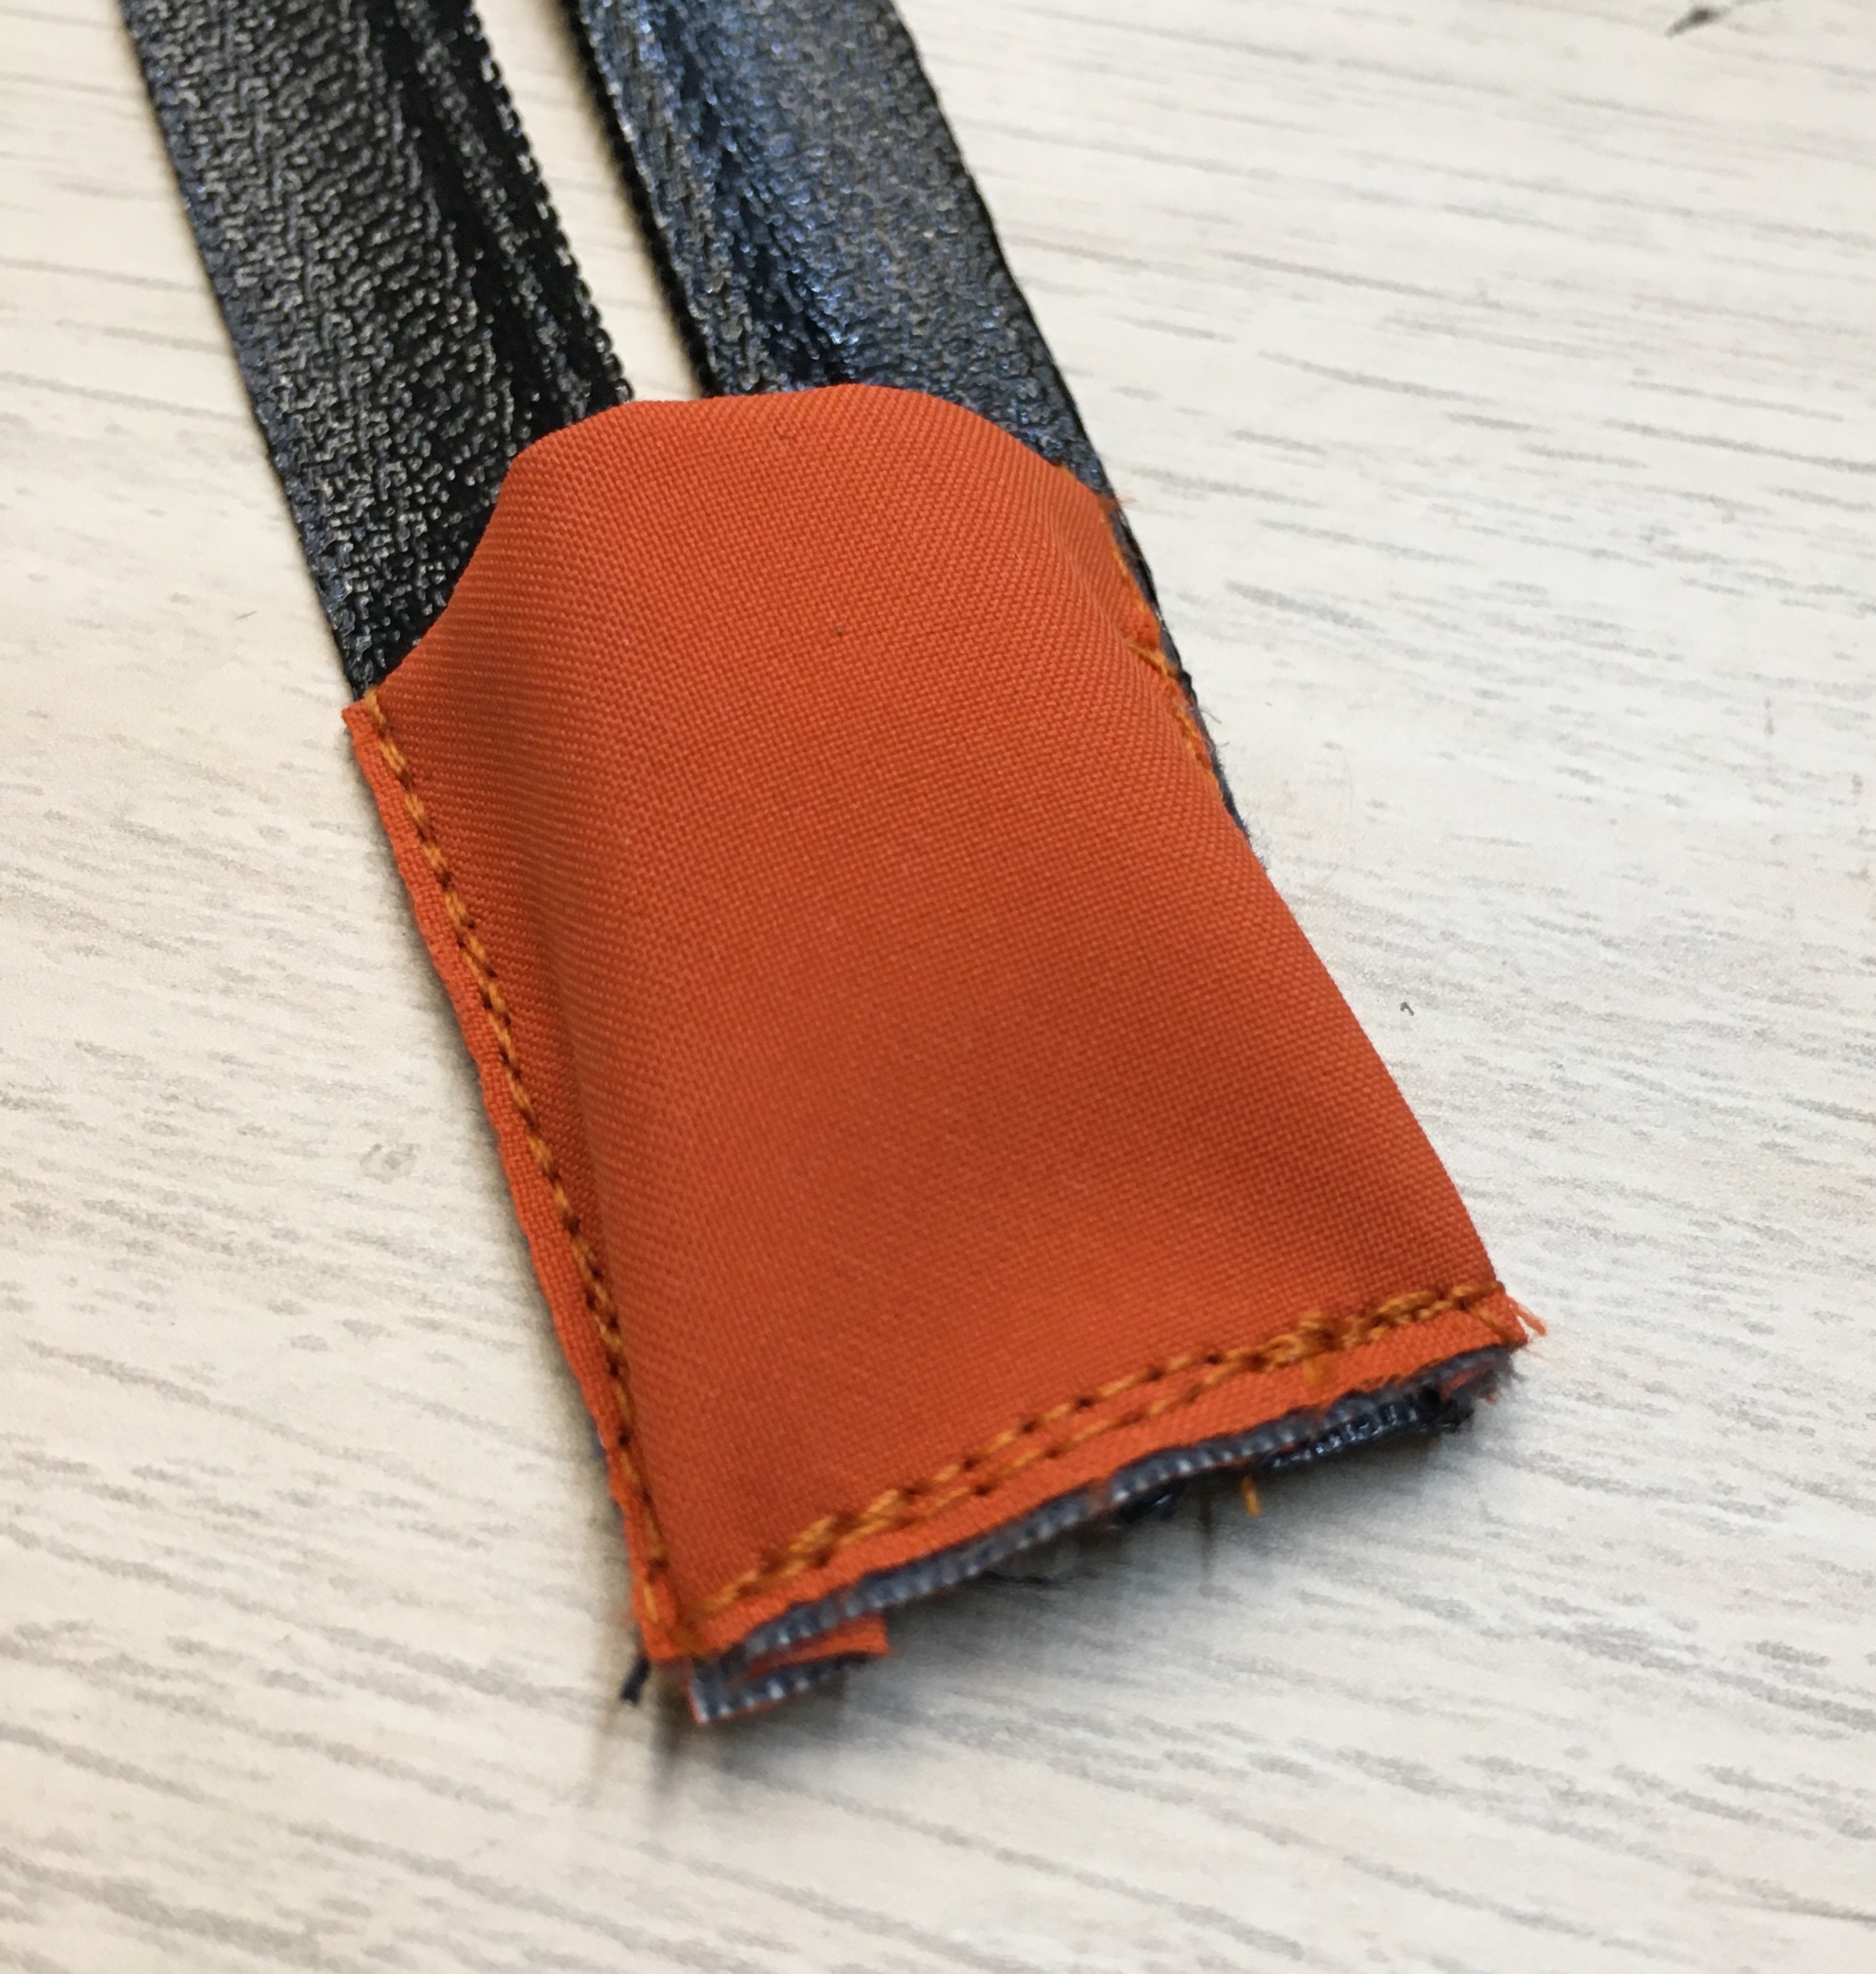 Zipper garage. The orange thread I picked up matched the fabric very well.